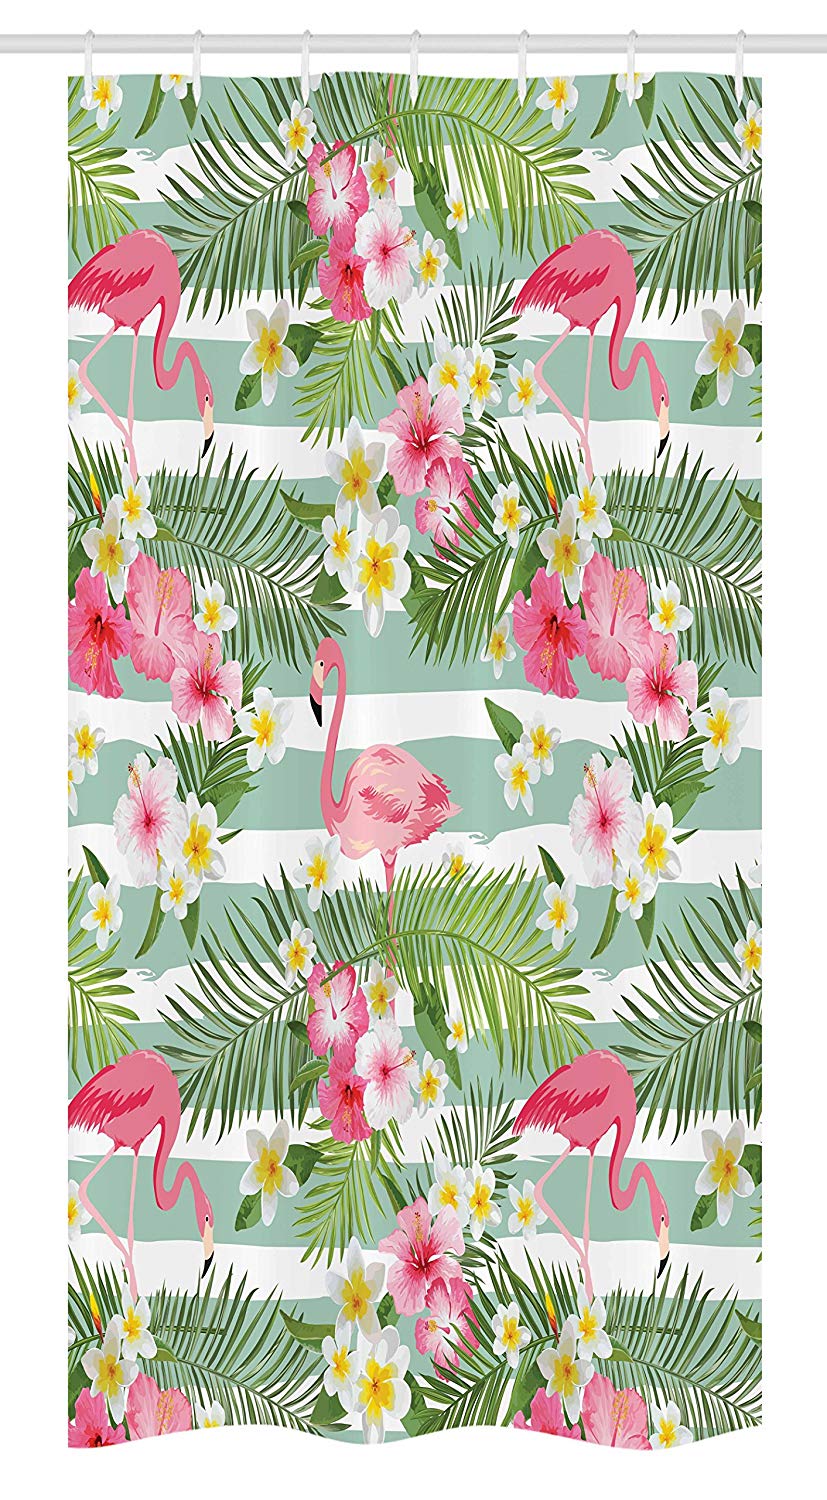 Ambesonne Flamingo Stall Shower Curtain, Flamingos with Exotic Hawaiian Leaves Flowers on Striped Vintage Background, Fabric Bathroom Decor Set with Hooks, 36